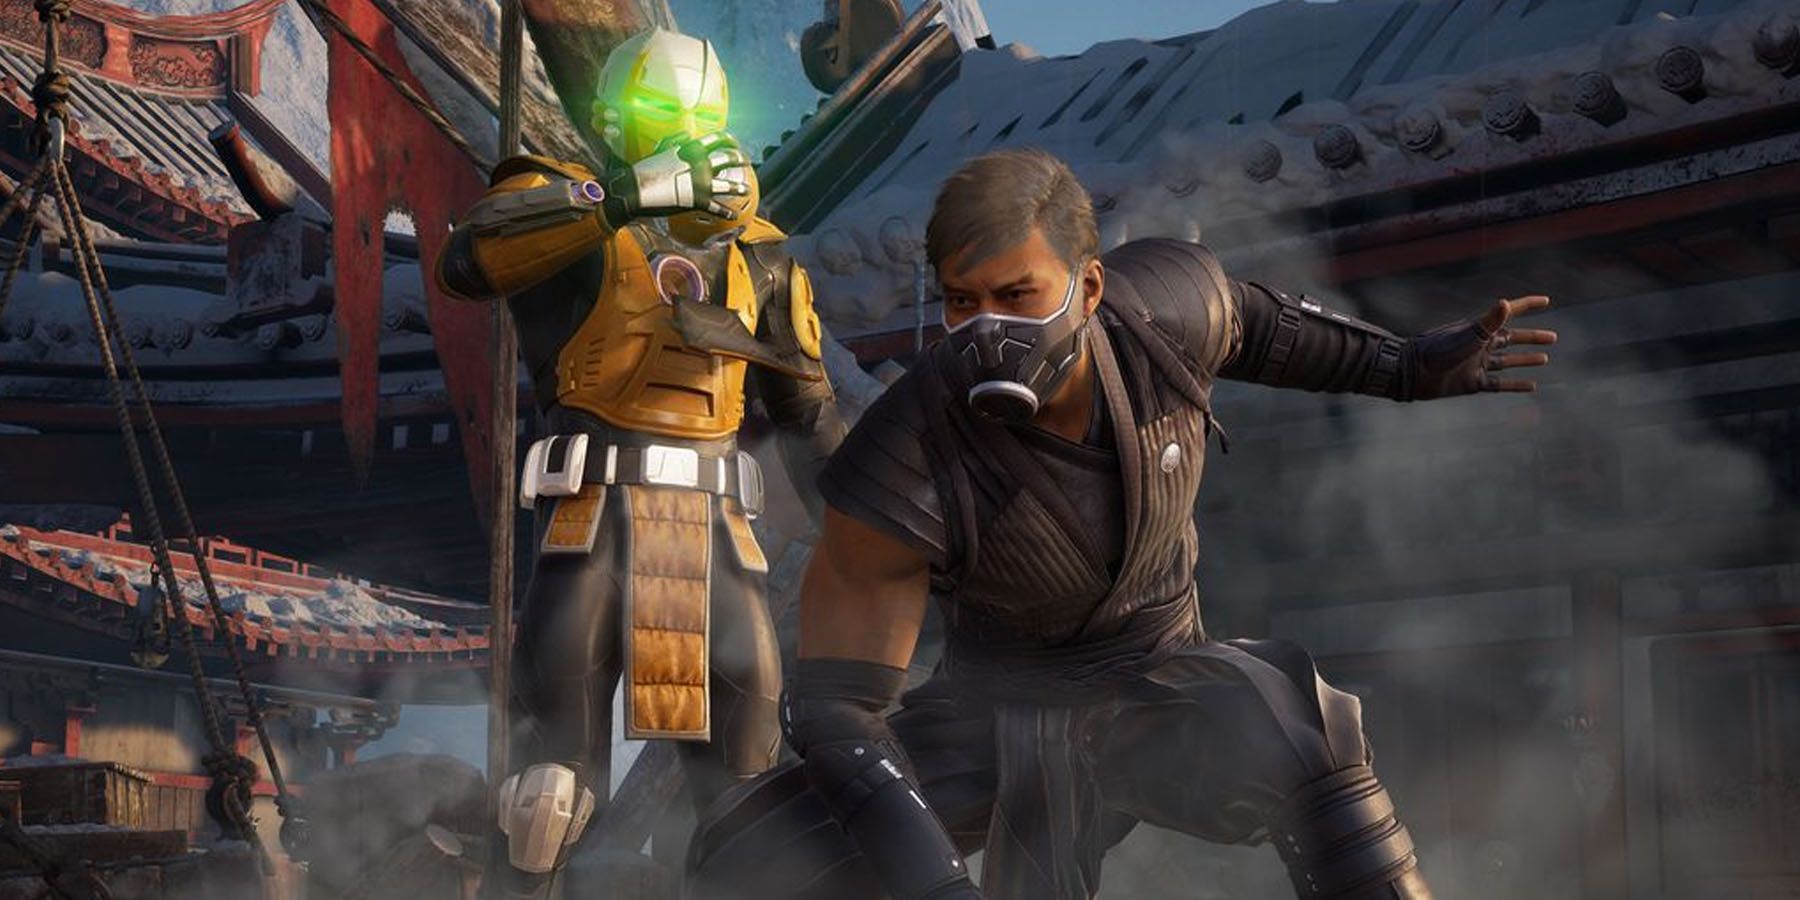 Mortal Kombat co-creator Ed Boon teases DLC characters with kryptic tweets